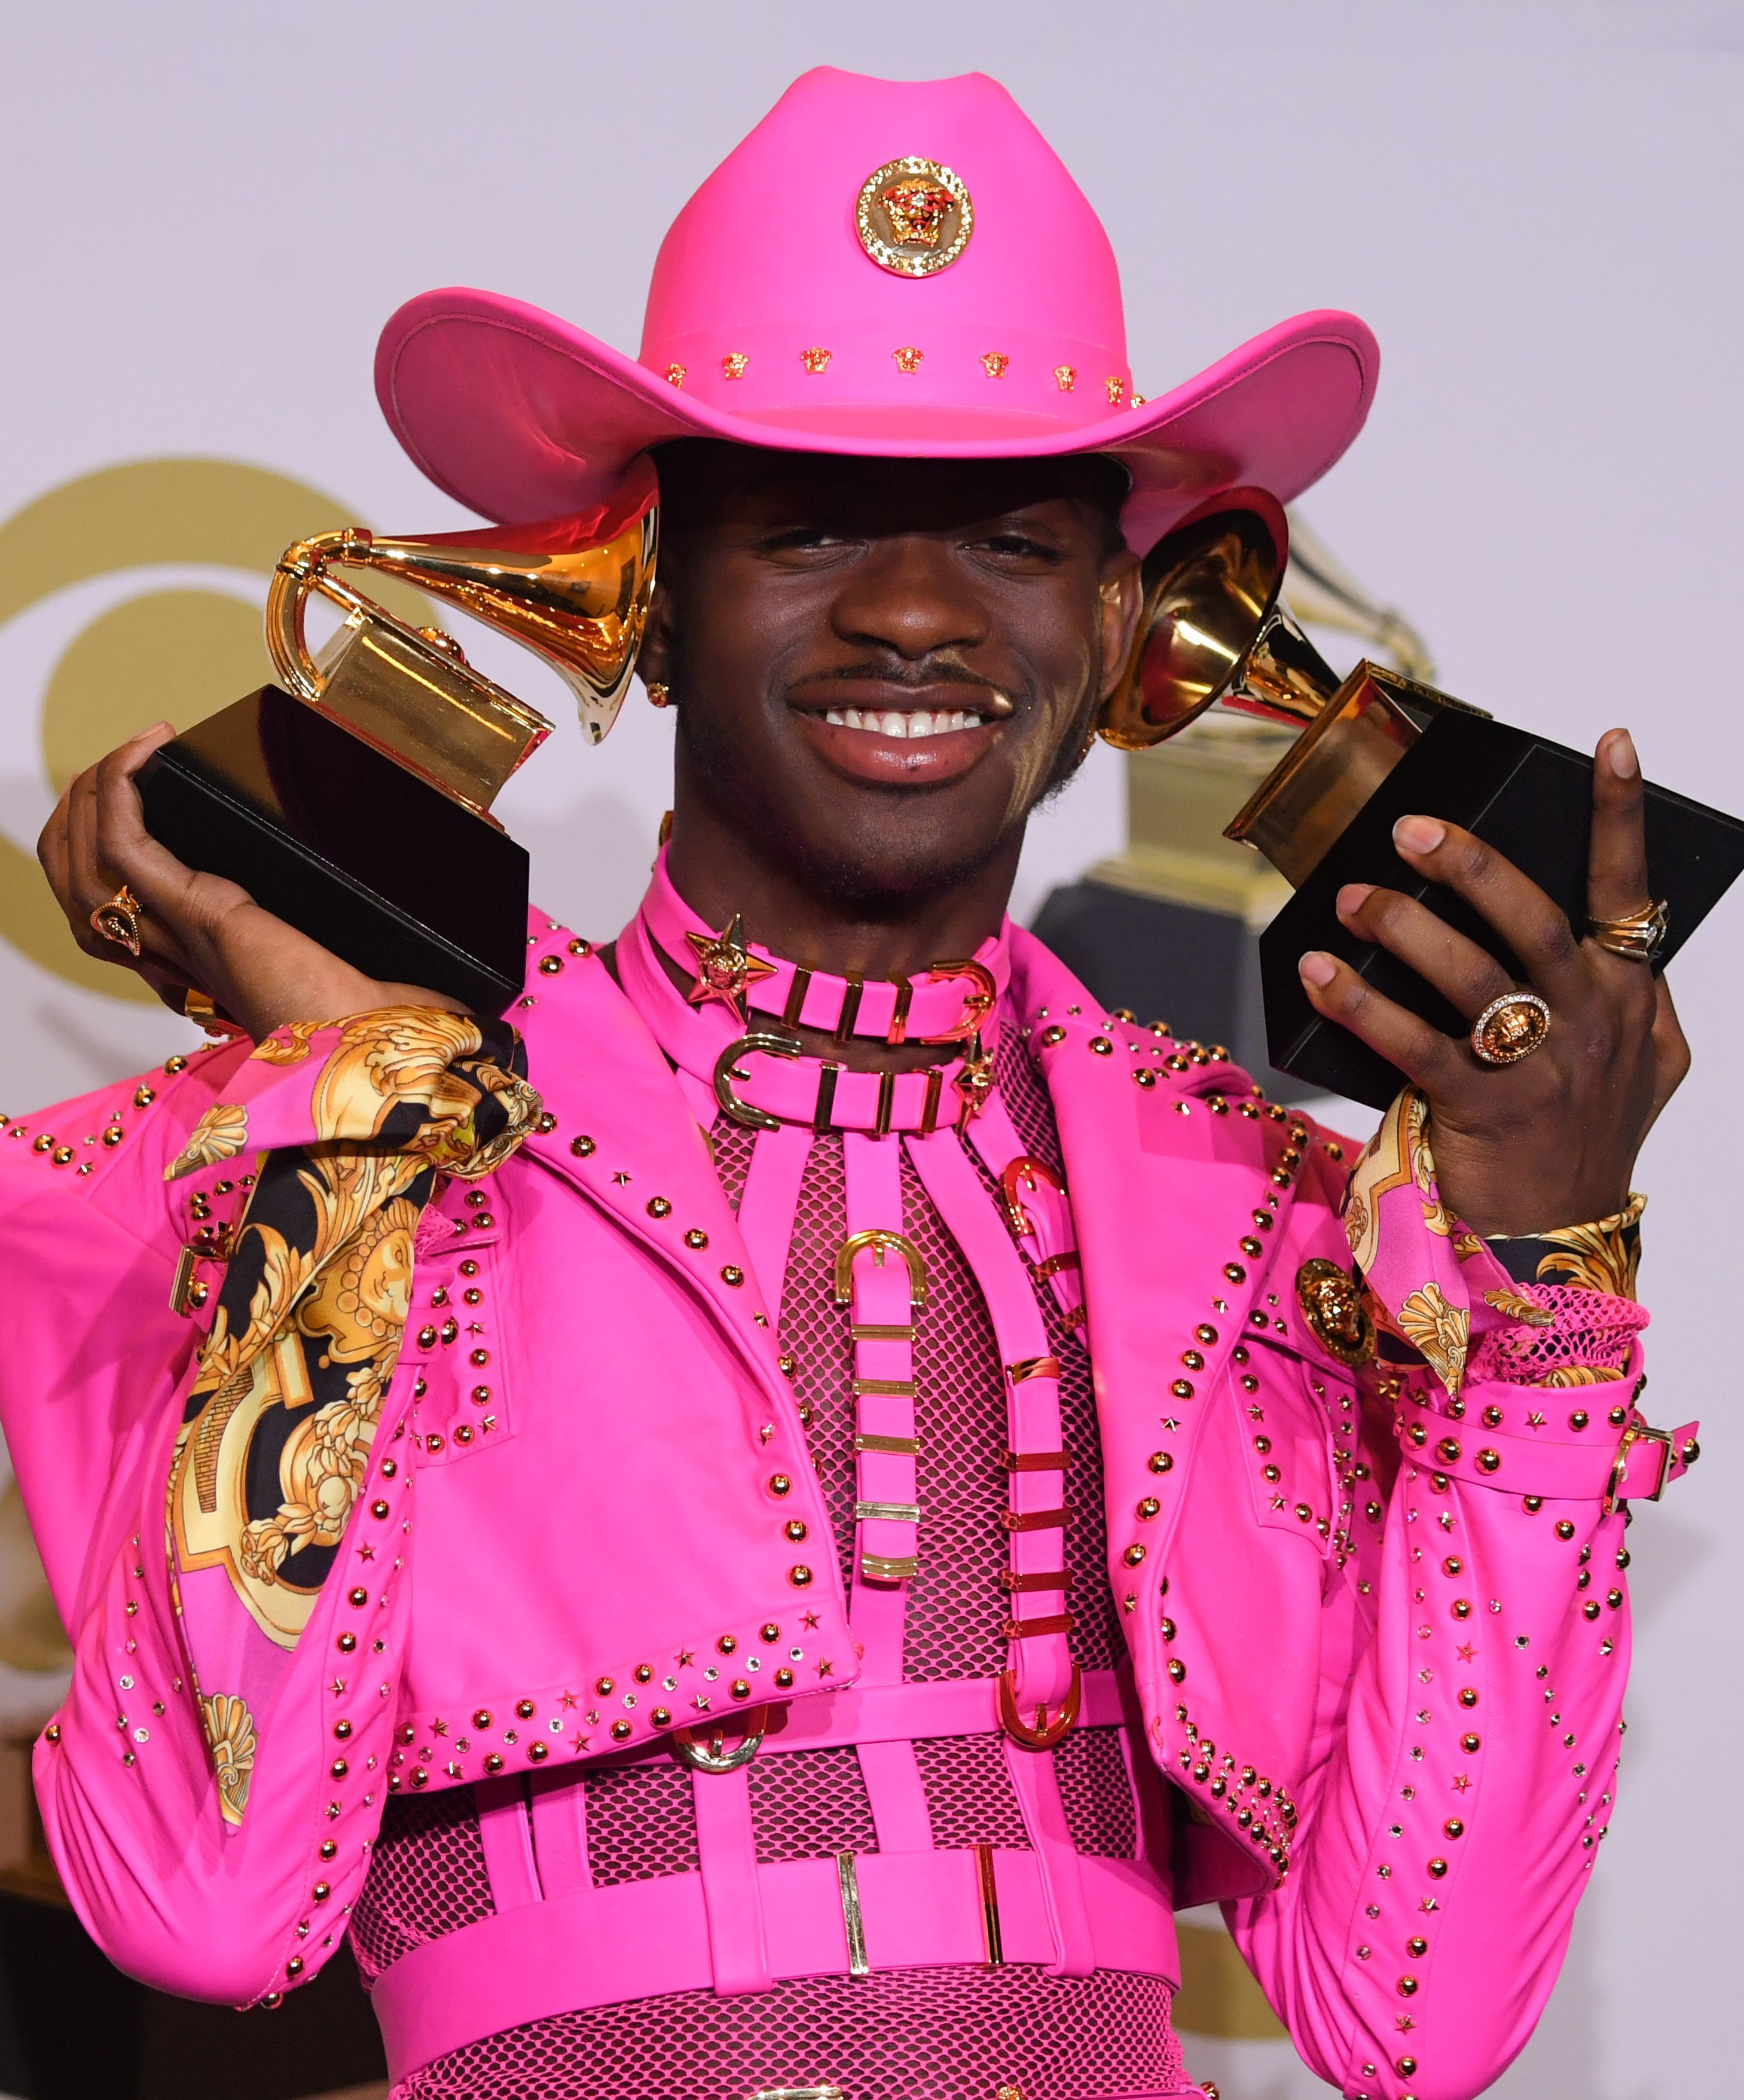 <p>Who hasn't blasted "Old Town Road"?! In the summer of 2019, Lil Nas X's remixed country-rap track, which also features hitmaker Billy Ray Cyrus, set a new record when it became the <a href="https://www.wonderwall.com/entertainment/music/biggest-music-news-2019-3021347.gallery?photoId=1061564">longest running No. 1</a> on the Billboard Hot 100, topping the chart for an incredible 19 consecutive weeks. Further, the Grammy winner's hit <a href="https://www.wonderwall.com/entertainment/music/icymi-week-music-oct-20-26-2019-selena-gomez-new-music-justin-bieber-quiet-riot-drummer-cancer-more-3021415.gallery?photoId=1058386">achieved Diamond status</a> in October 2019 (which means it moved 10 million certified units), hitting the sales milestone faster than any other song.</p>